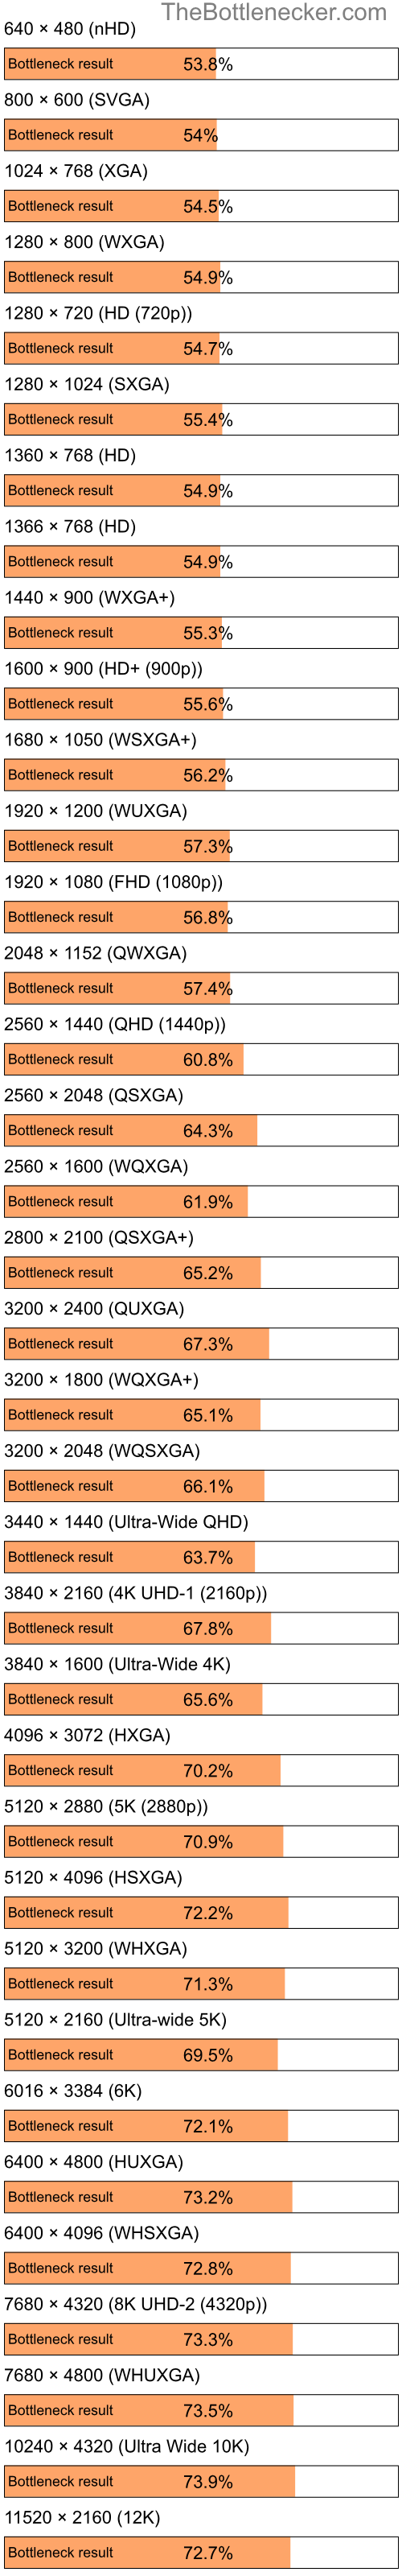 Bottleneck results by resolution for Intel Pentium 4 and NVIDIA GeForce 7300 LE in Processor Intense Tasks